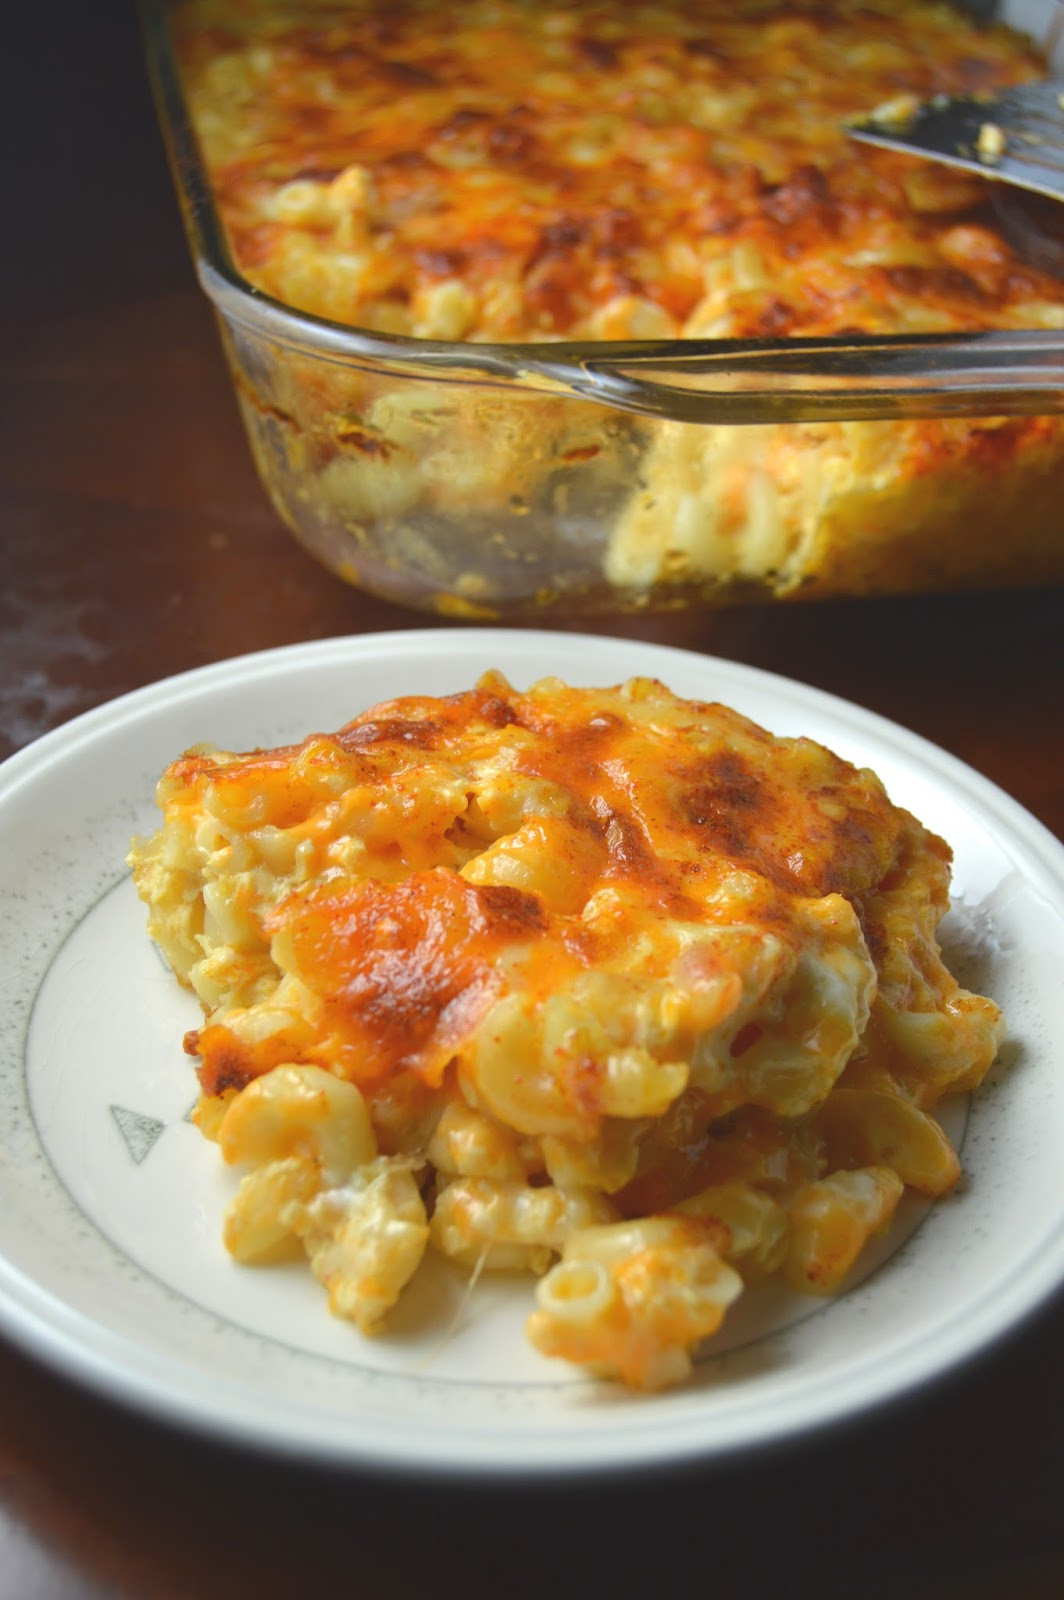 Baked Macaroni And Cheese With Spaghetti Noodles
 Baked Macaroni and Cheese